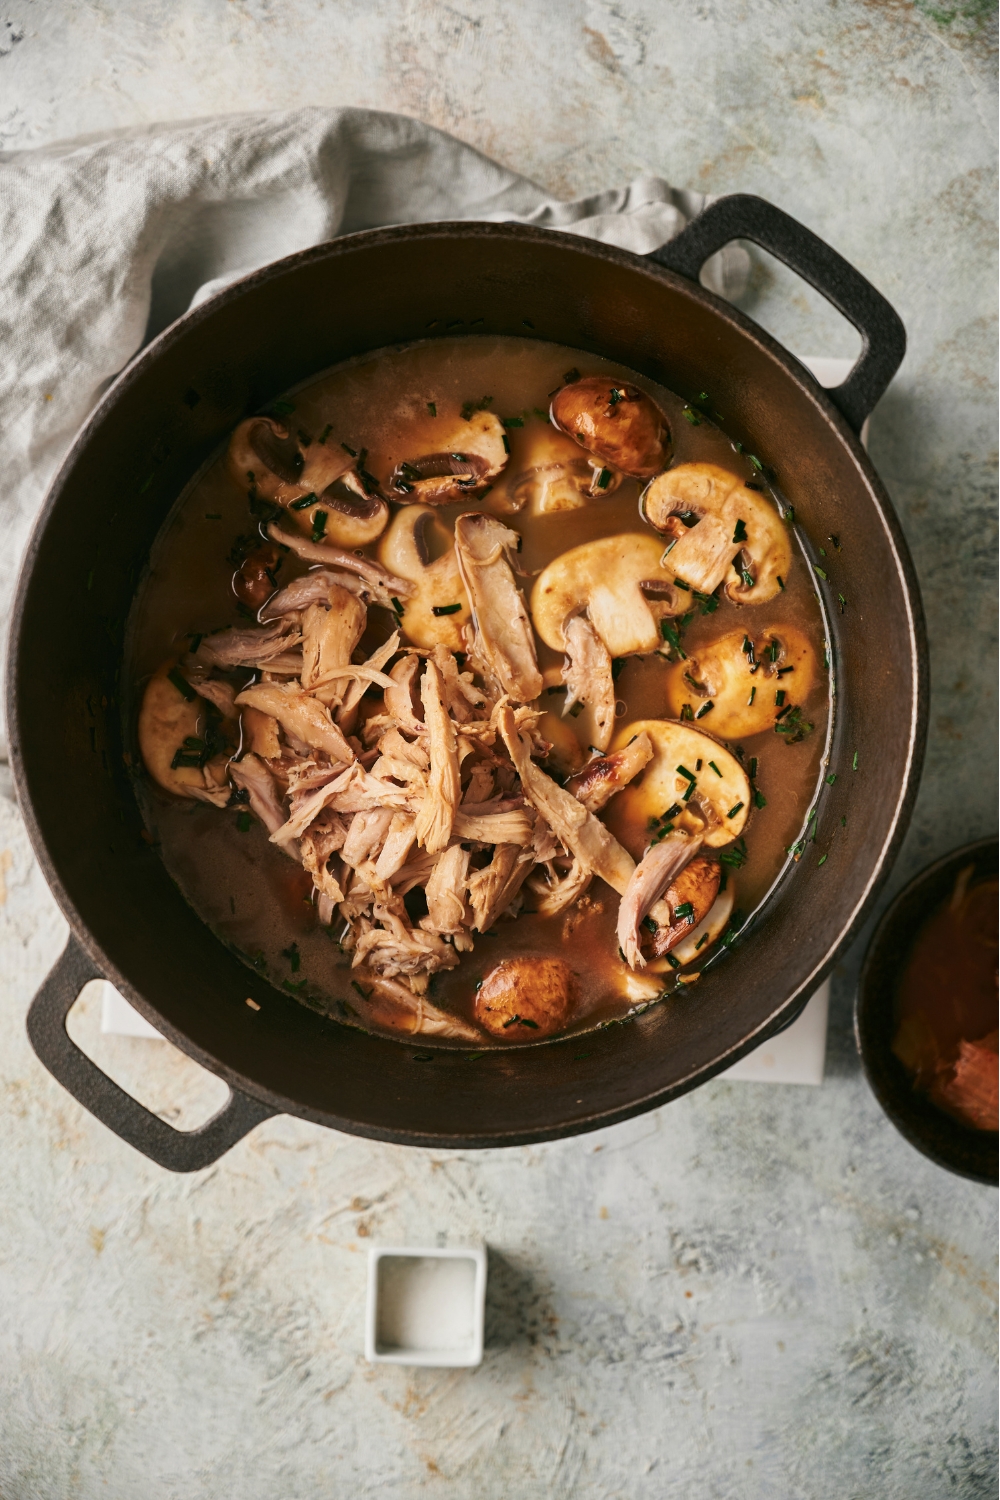 A black Dutch oven filled with mushroom slices, shredded chicken, and broth.